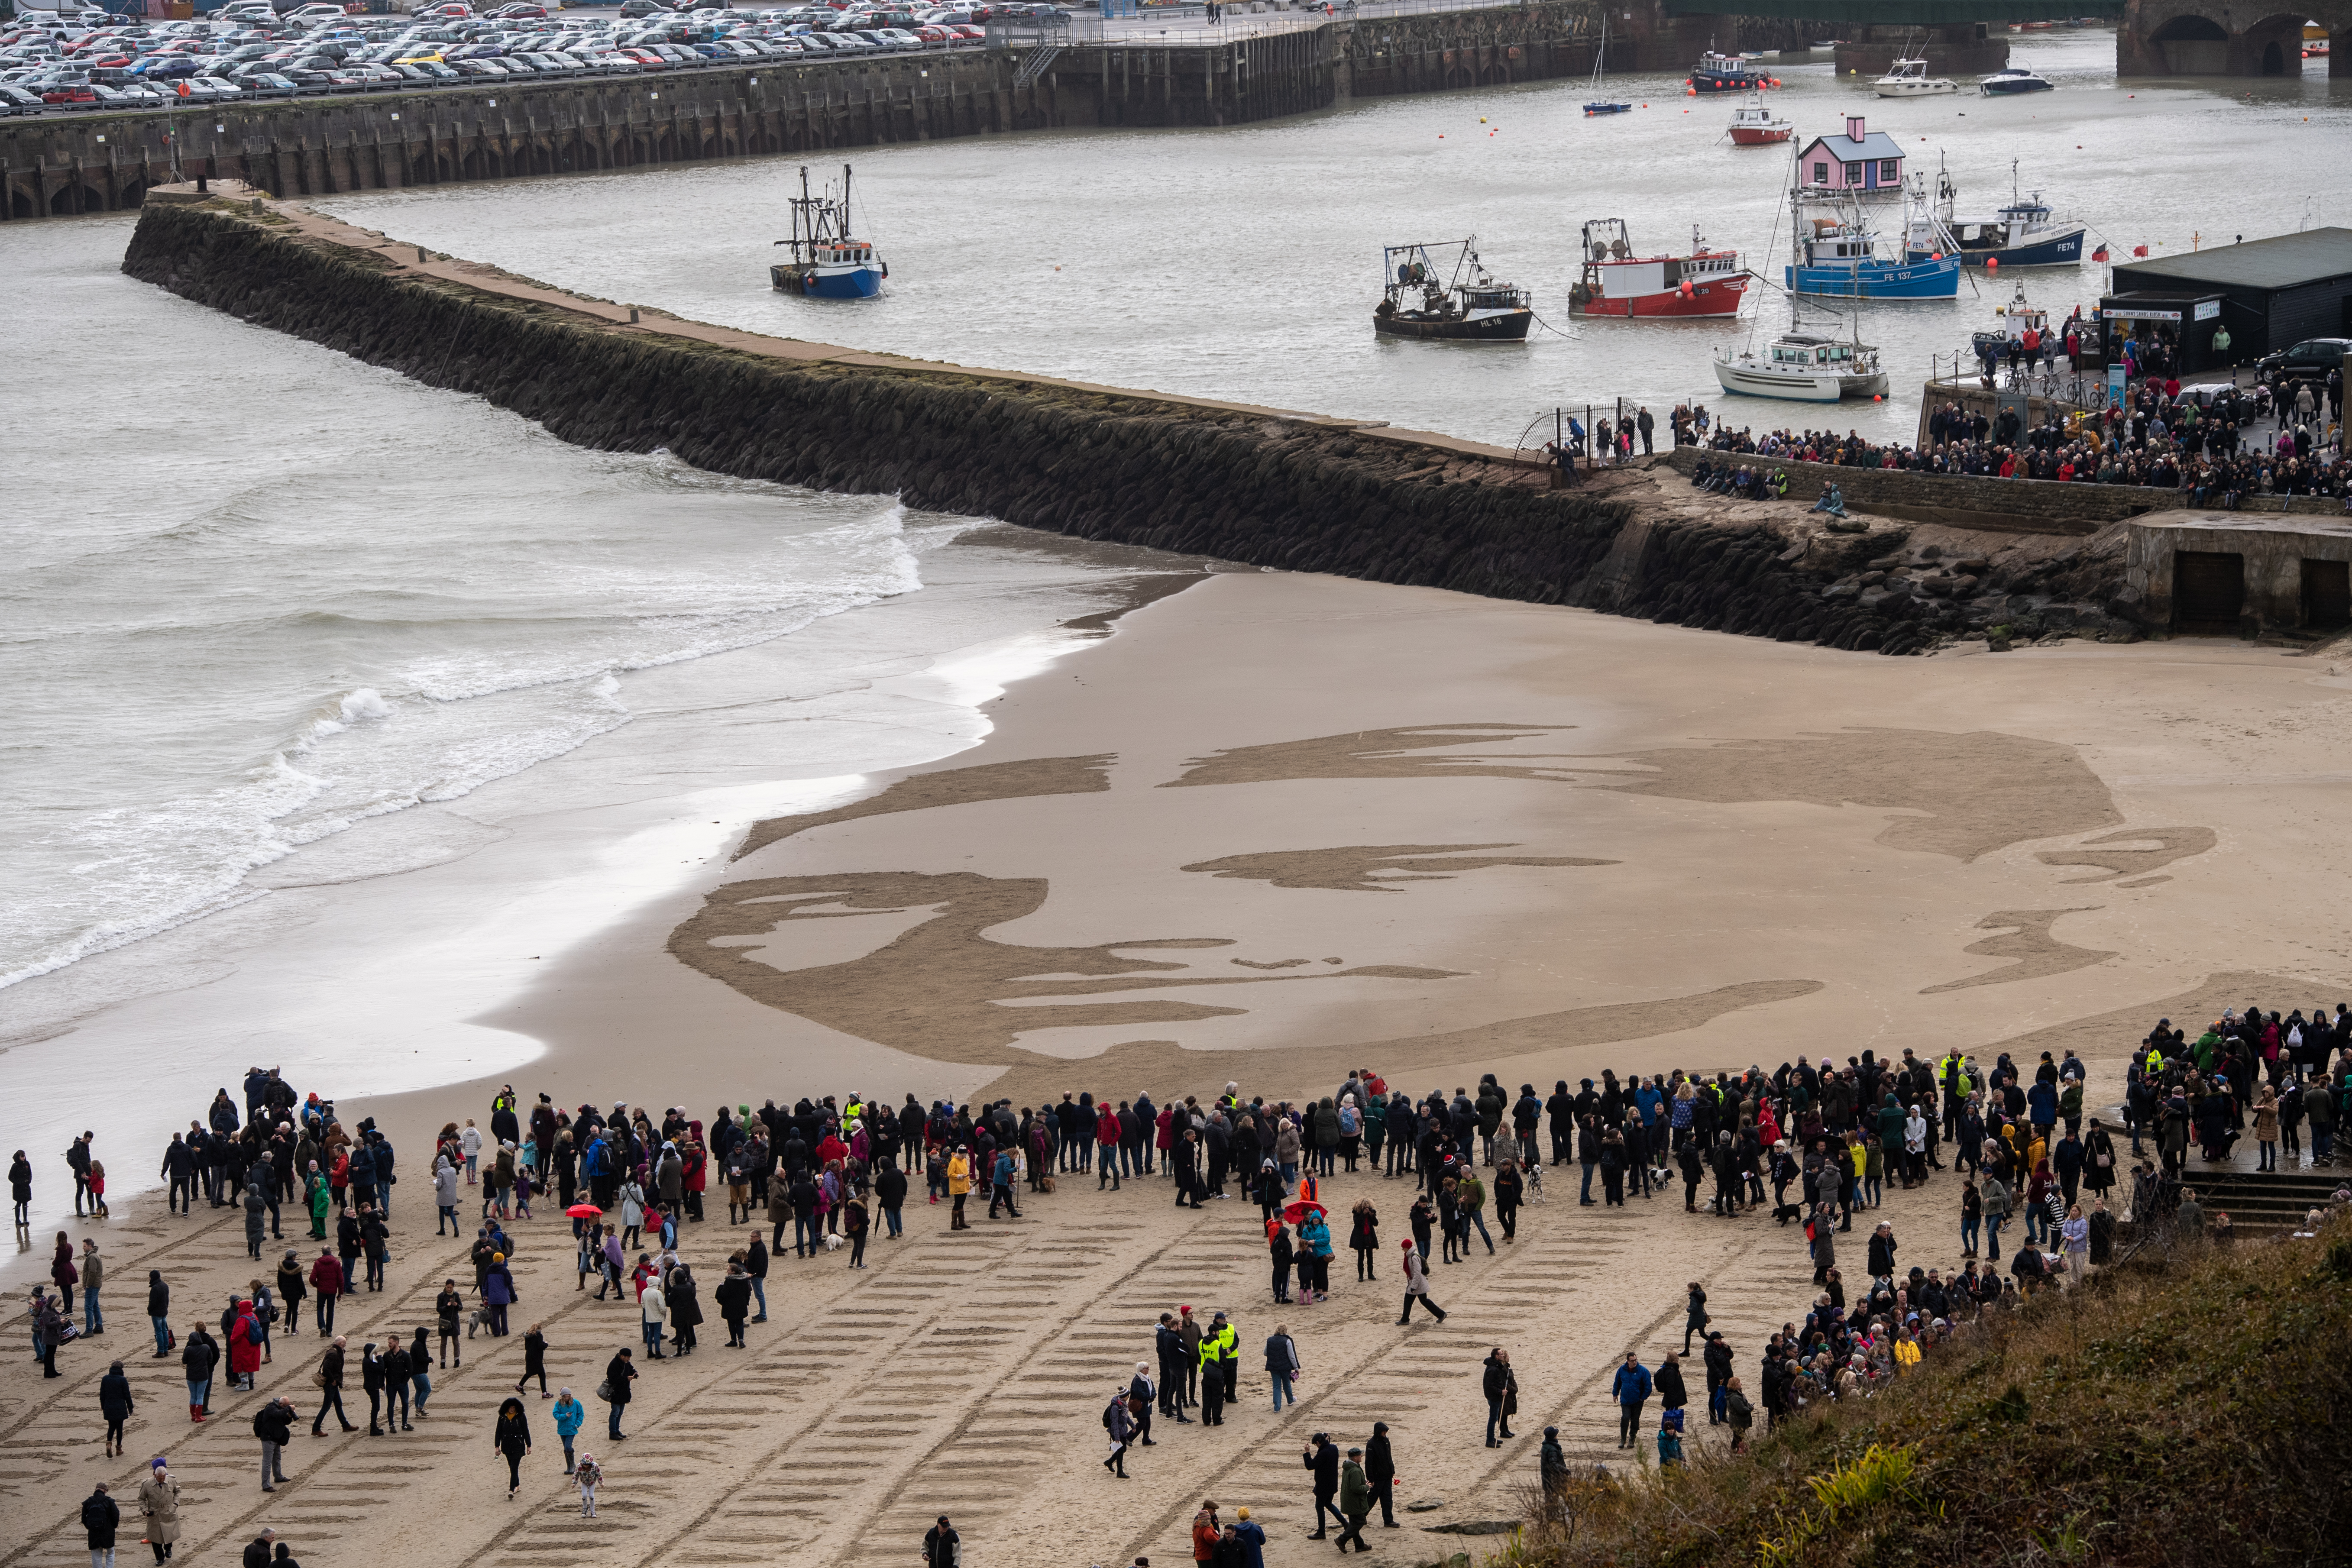 Visitors gather at Sunny Sands Beach, Folkestone, in south east England, to see the art installation. 